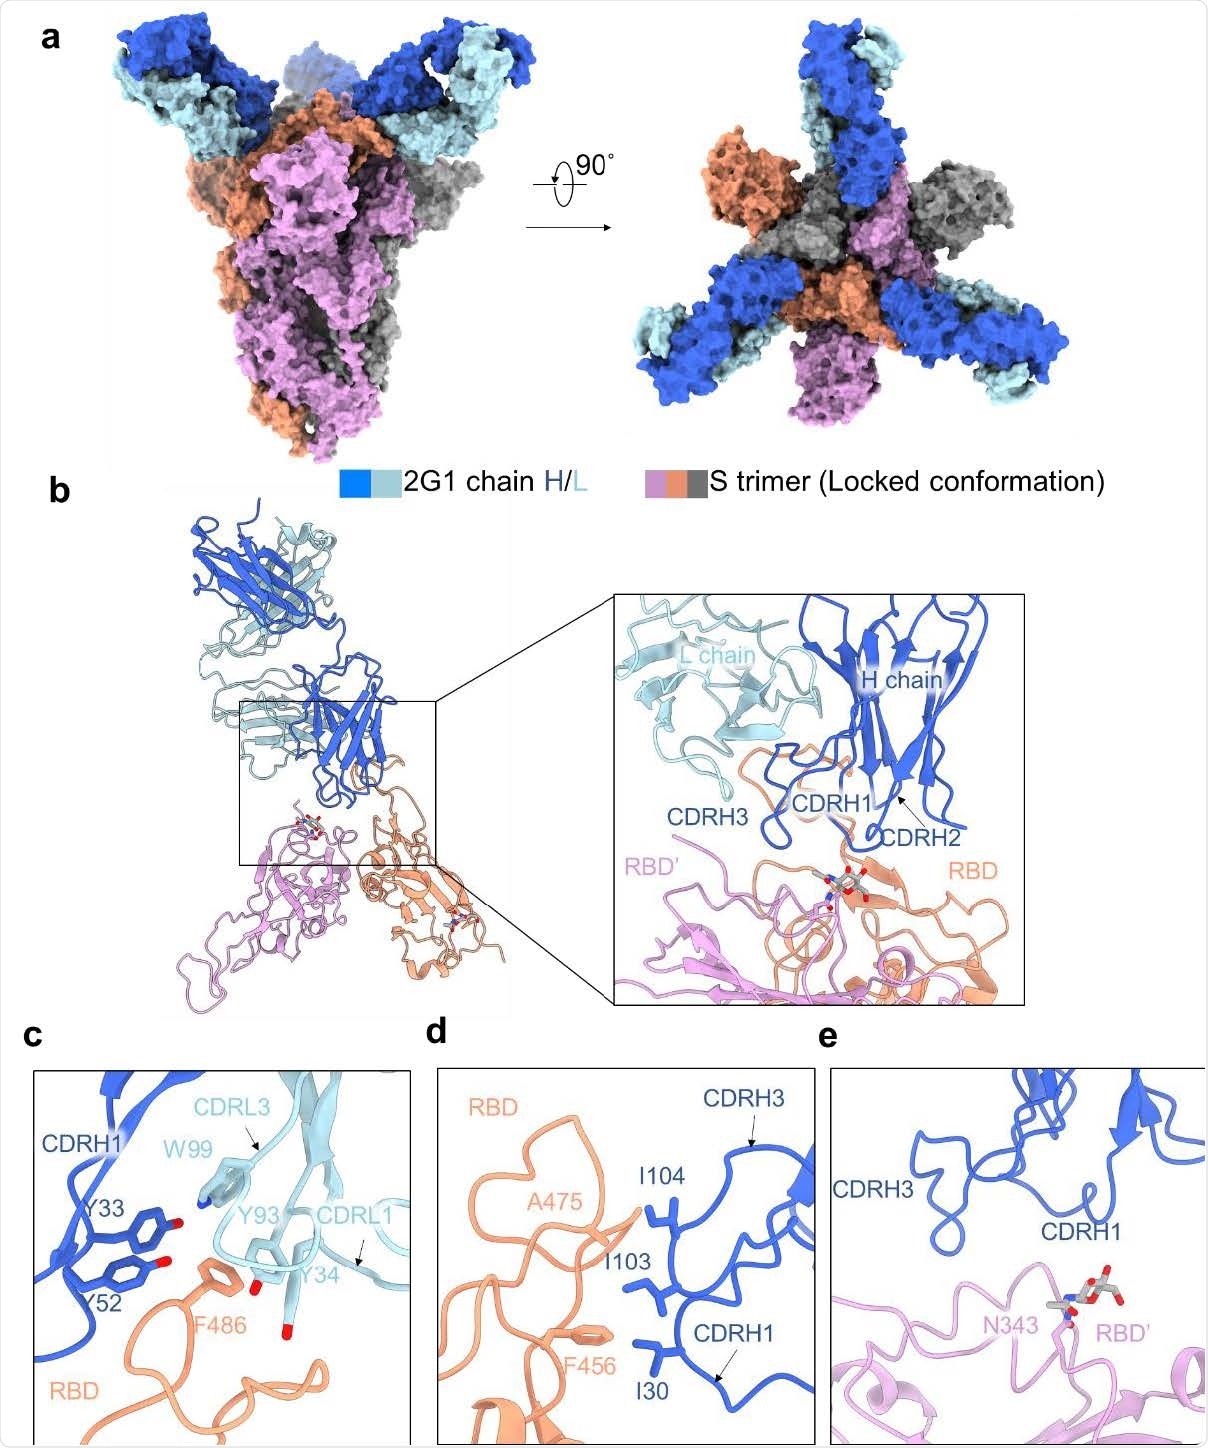 Cryo-EM structure of 2G1 and the complex with WA1/2020 S protein. a, The domain-colored cryo-EM map of SARS-CoV-2 S ectodomain trimer and 2G1 Fab fragments complex is shown, viewed along two perpendicular orientations. The heavy and light chains of 2G1 are colored blue and cyan, respectively. b, The three protomer of trimeric S protein are colored grey, orange and pink. c-e, The binding interface between 2G1 and RBD and adjacent RBD’. RBD and 2G1 interact each other mainly through hydrophobic interactions (c and d). 2G1 heavy chain (CDRH3 and CDRH1) lie above the adjacent RBD’ (e)